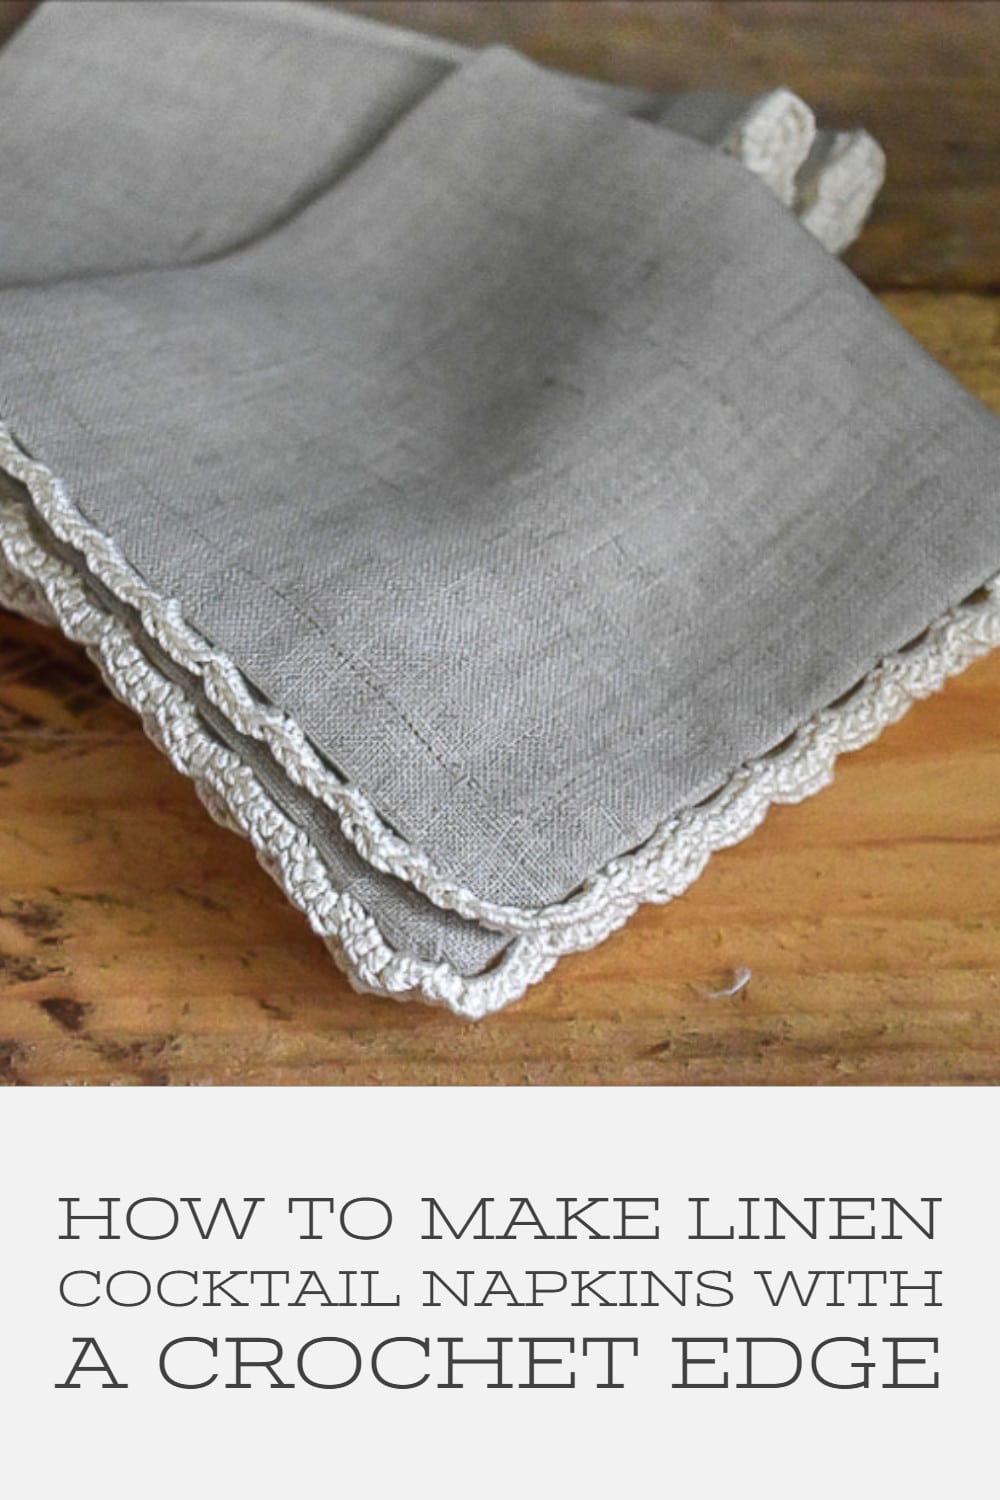 pin showing linen cocktail napkin with crochet edge